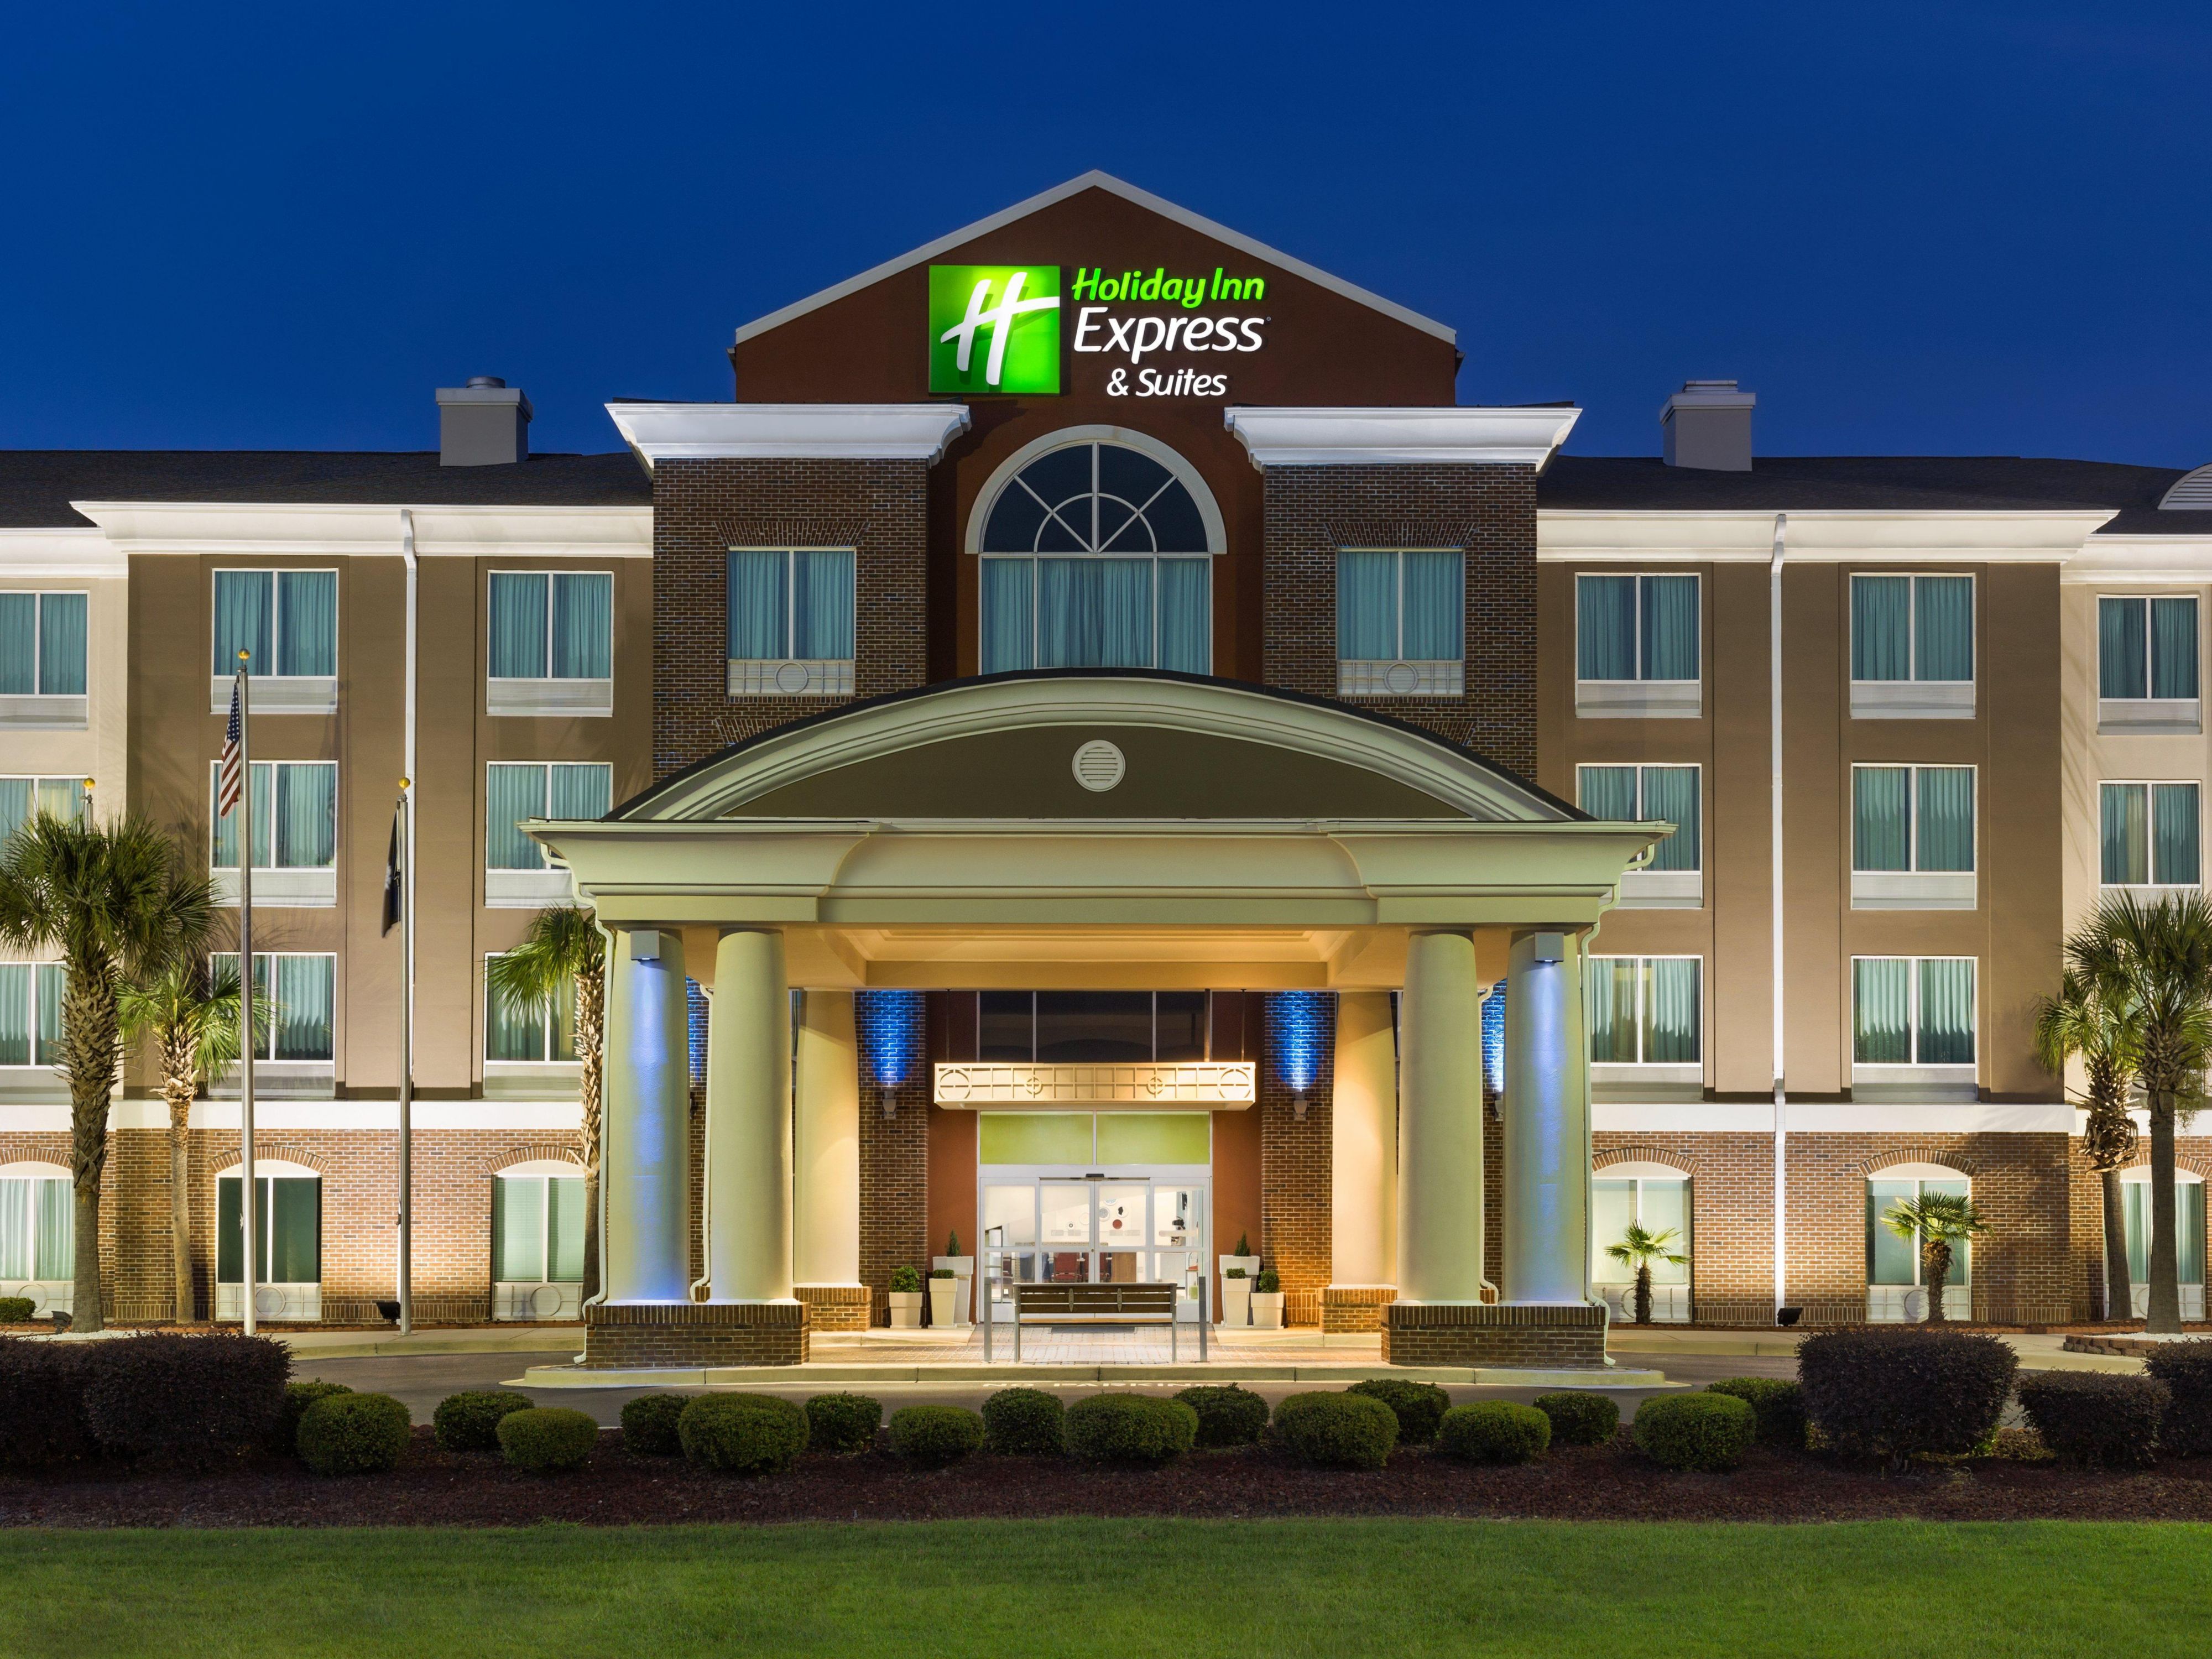 The future Holiday Inn Express in Latta SC will consist of 68 guestrooms across four stories